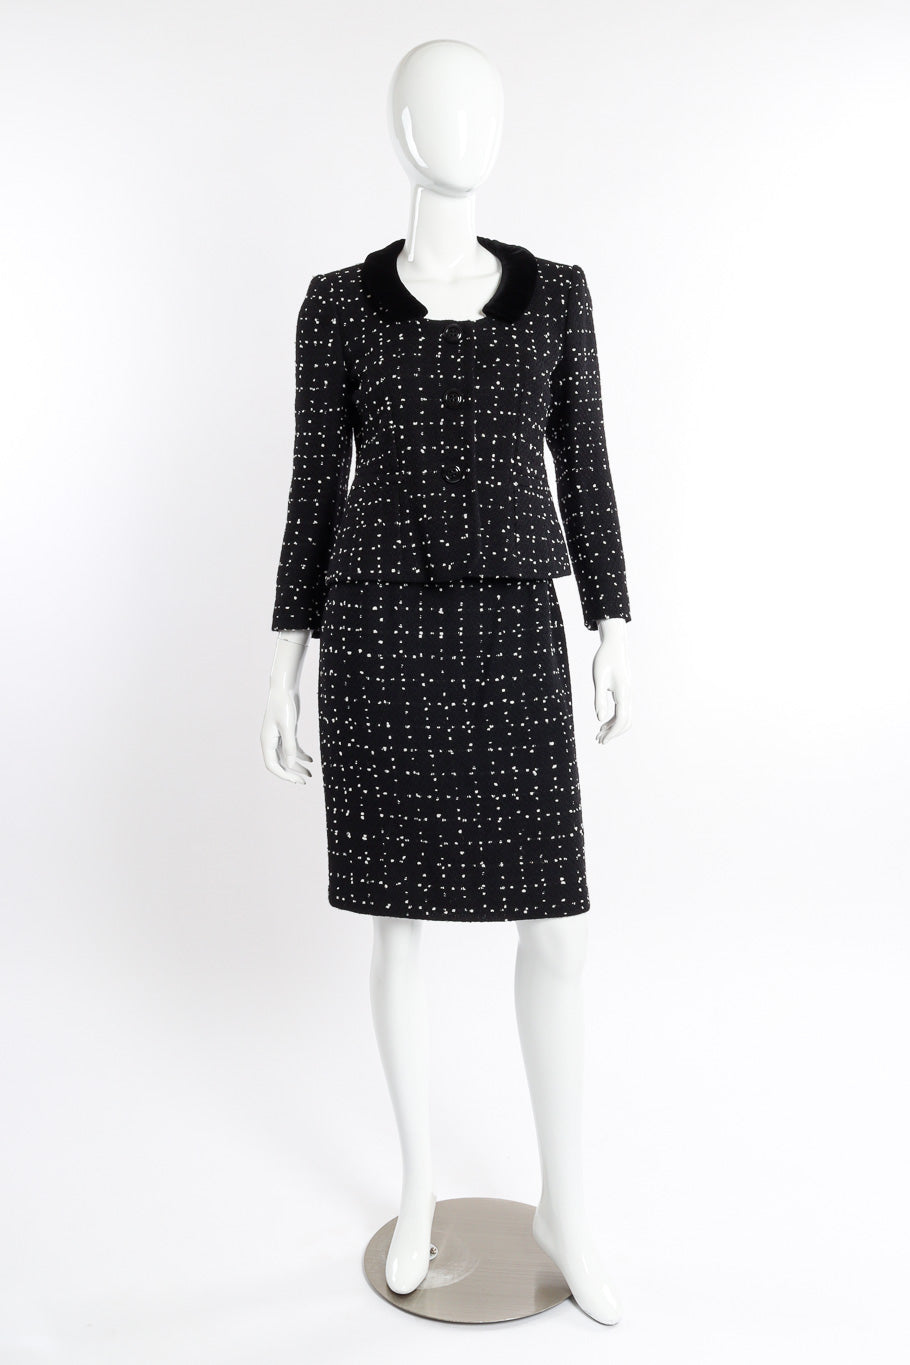 Vintage Moschino Dot Bouclé Jacket and Skirt Set front view on mannequin @recessla